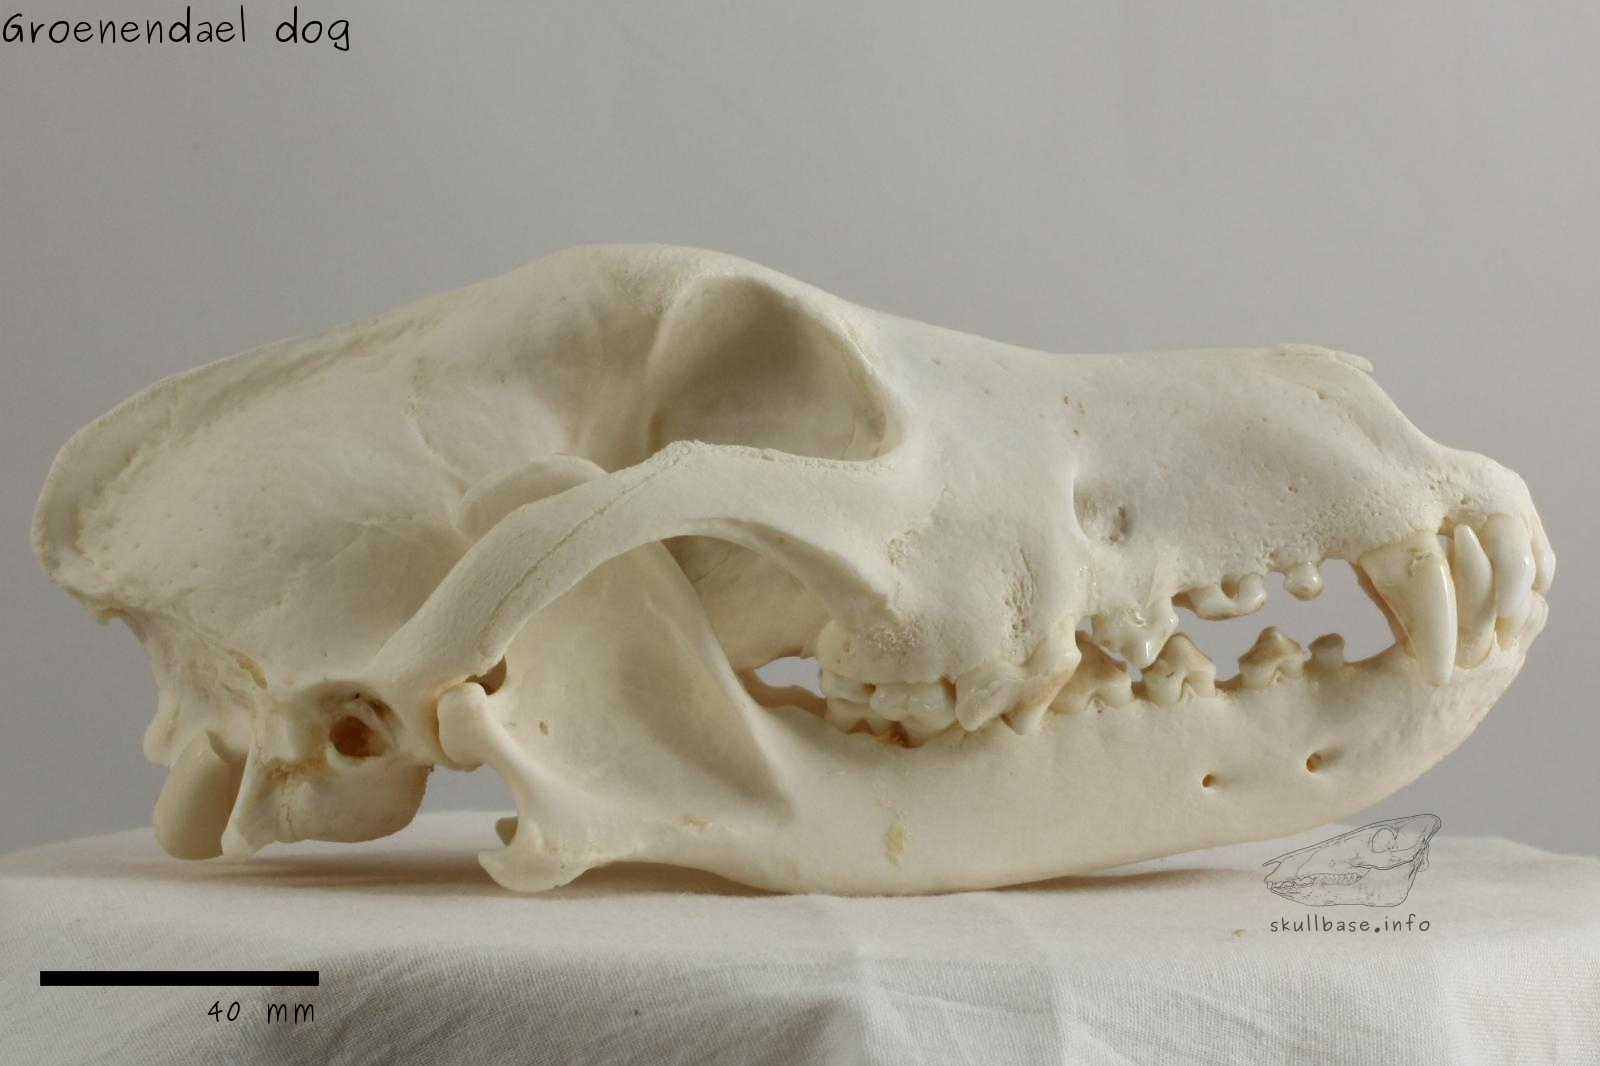 Groenendael dog (Canis lupus familiaris) skull lateral view